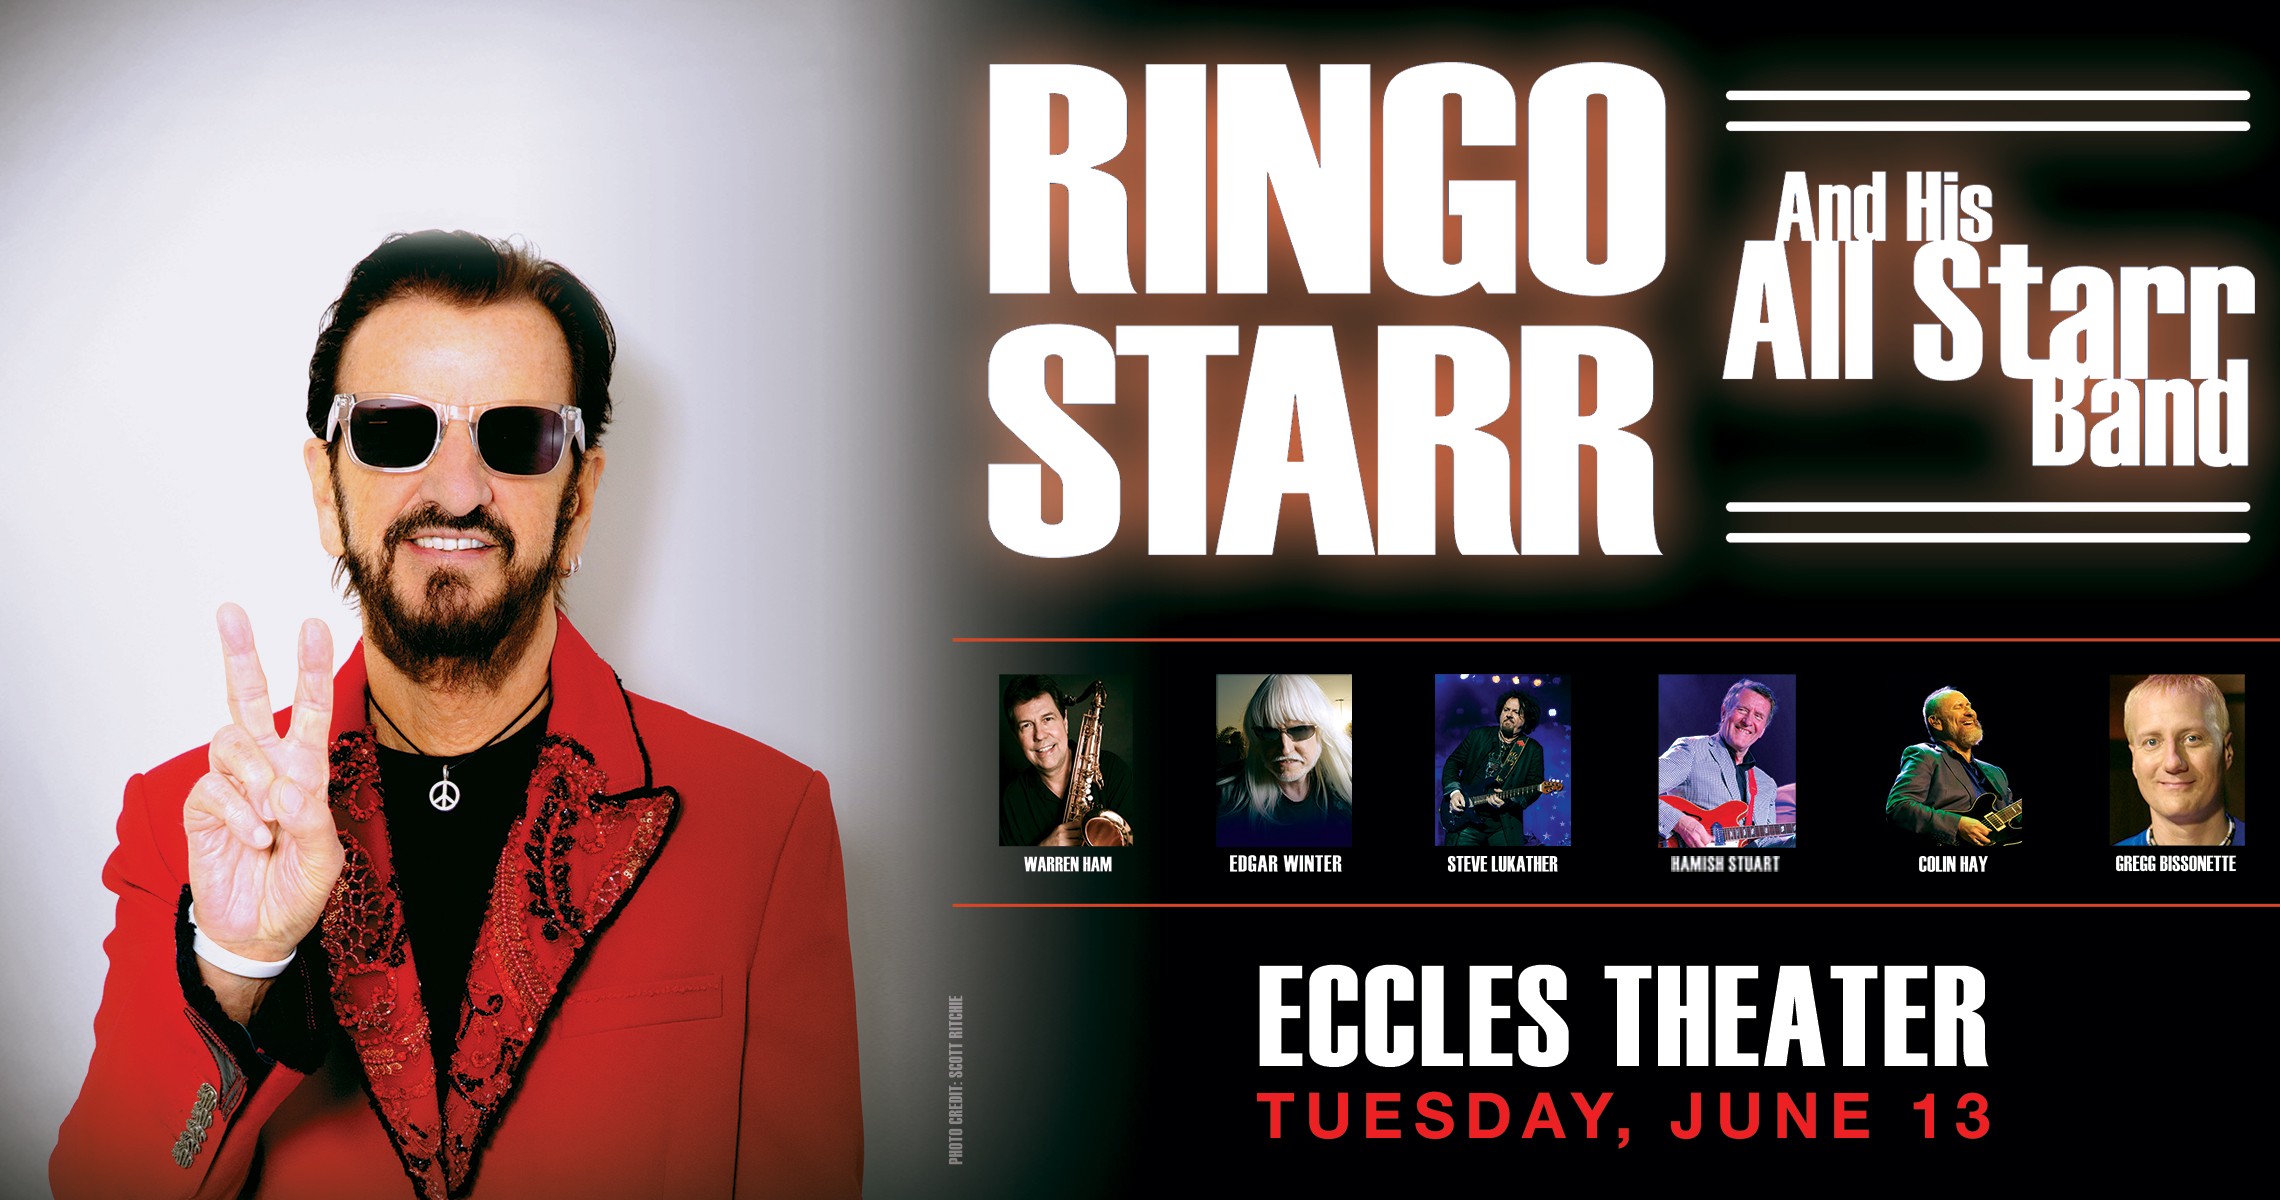 Ringo Starr Live at the Eccles